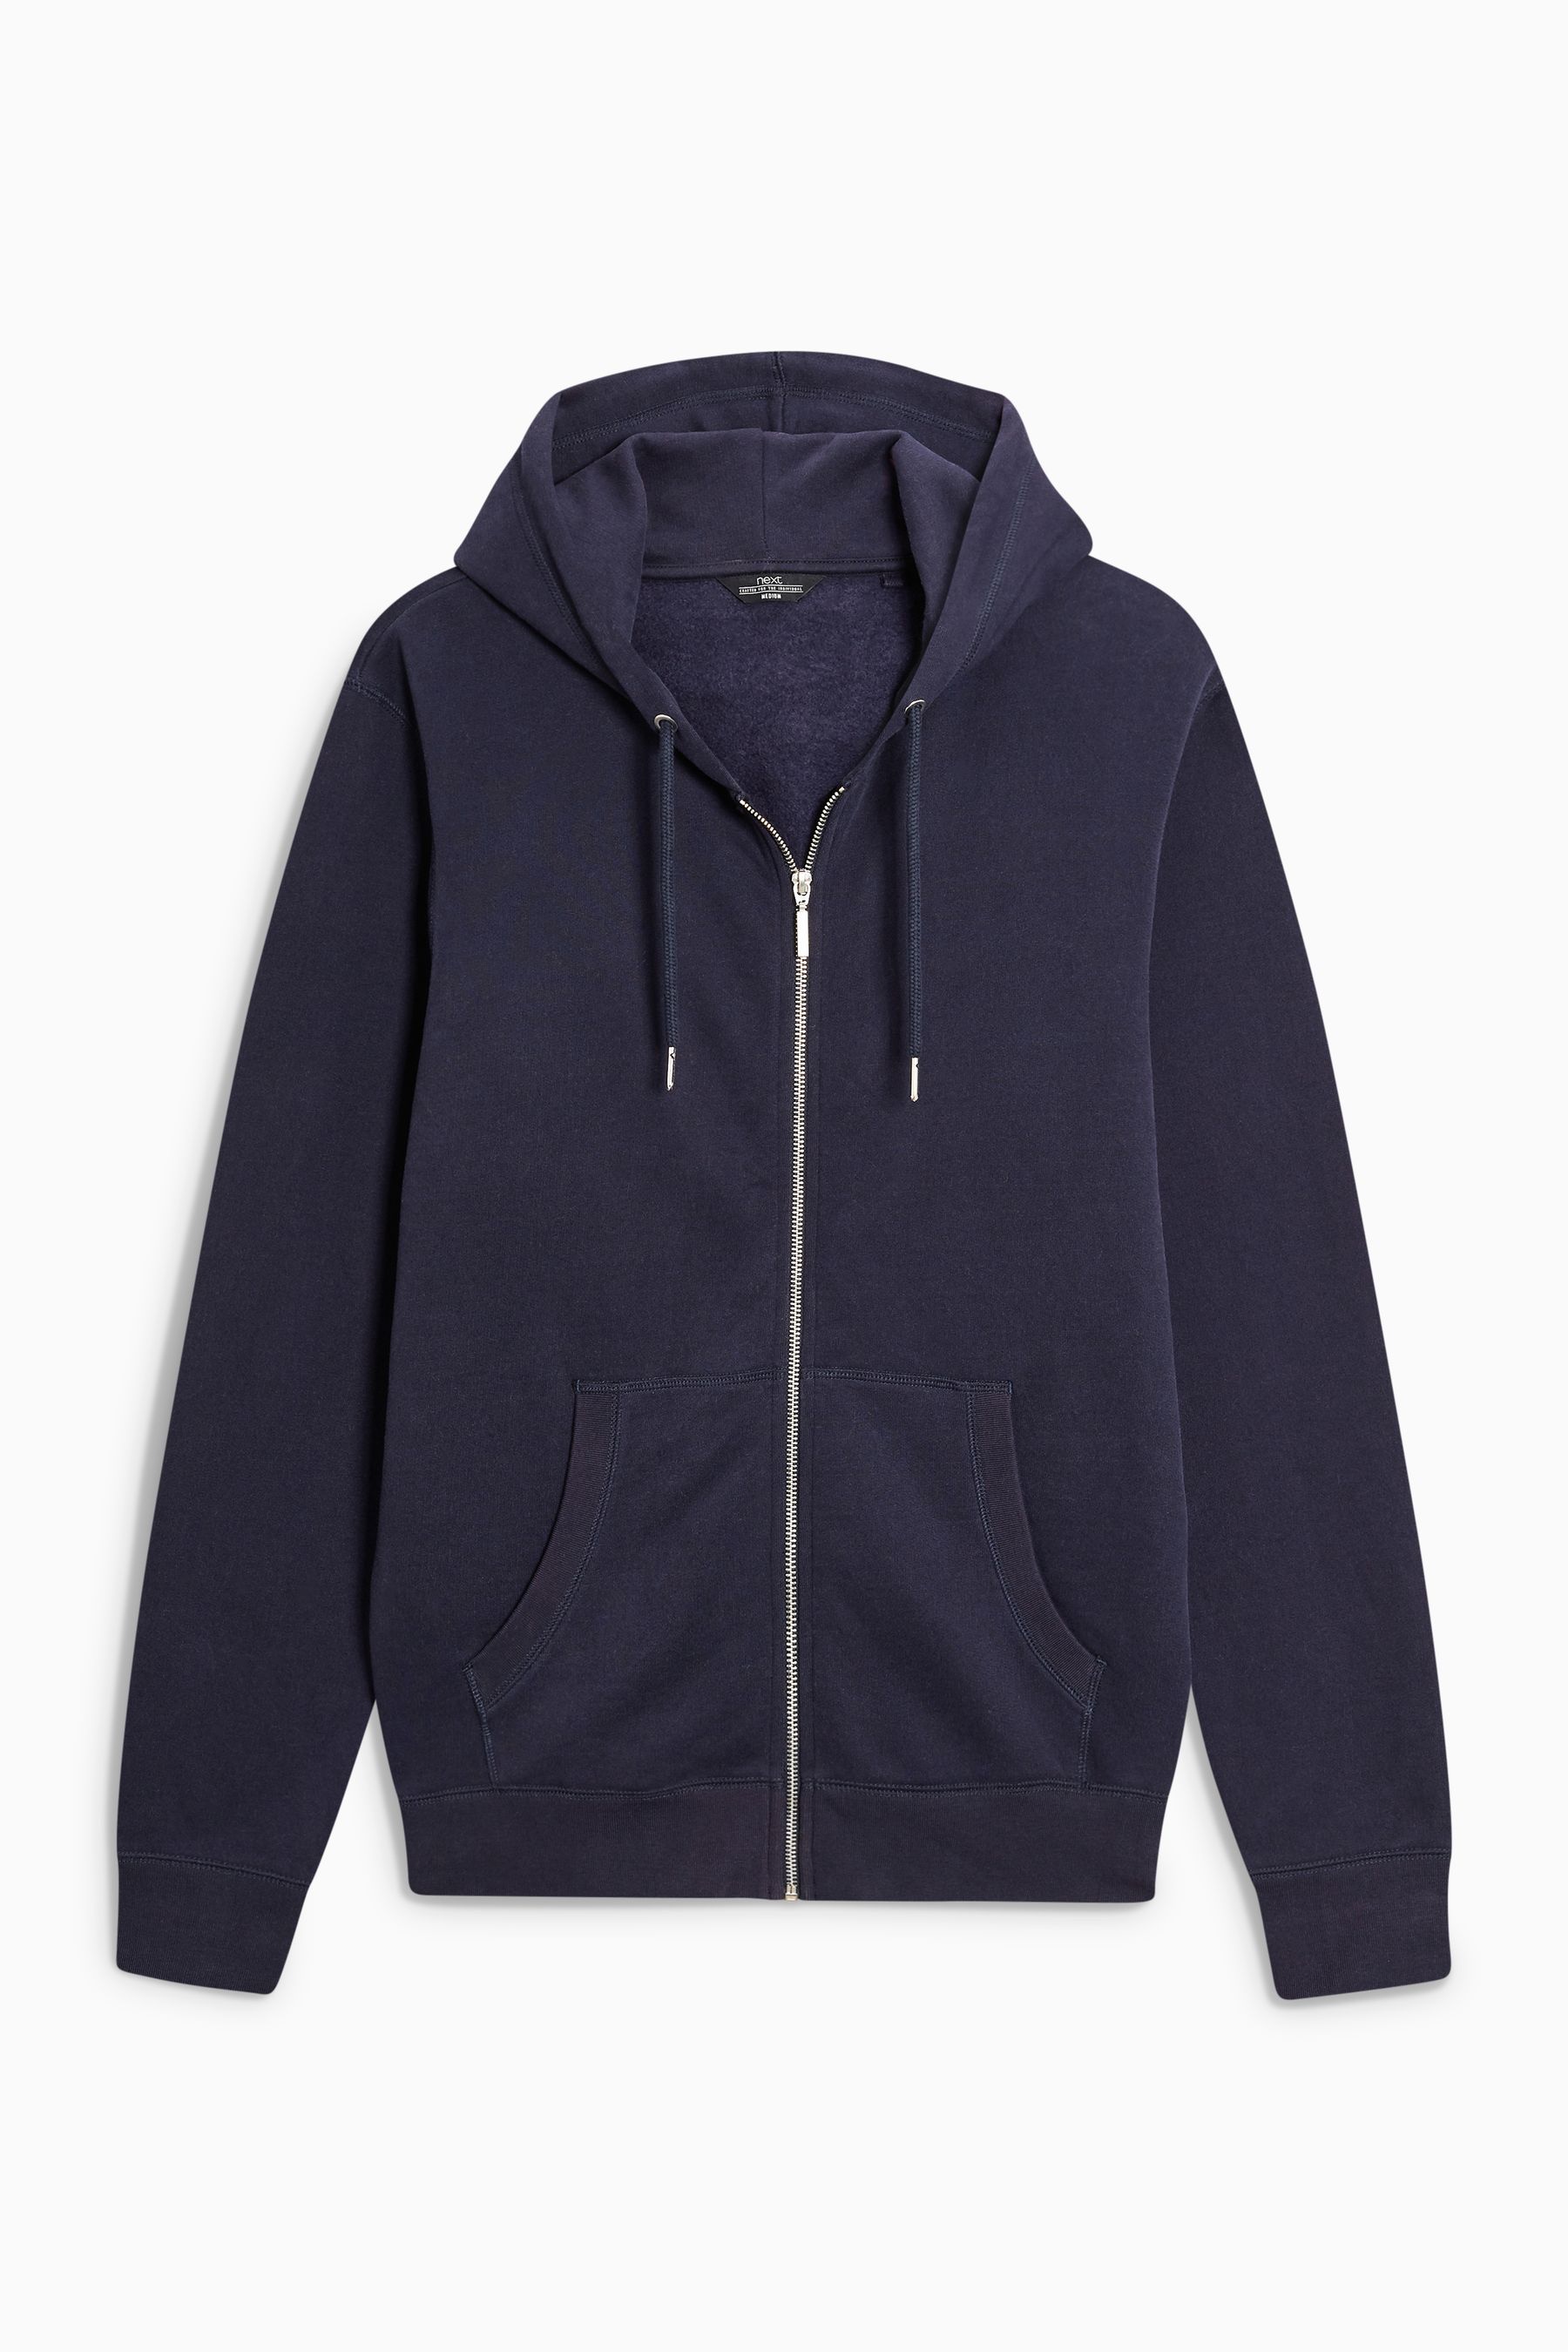 Buy Next Hoodie from the Next UK online shop